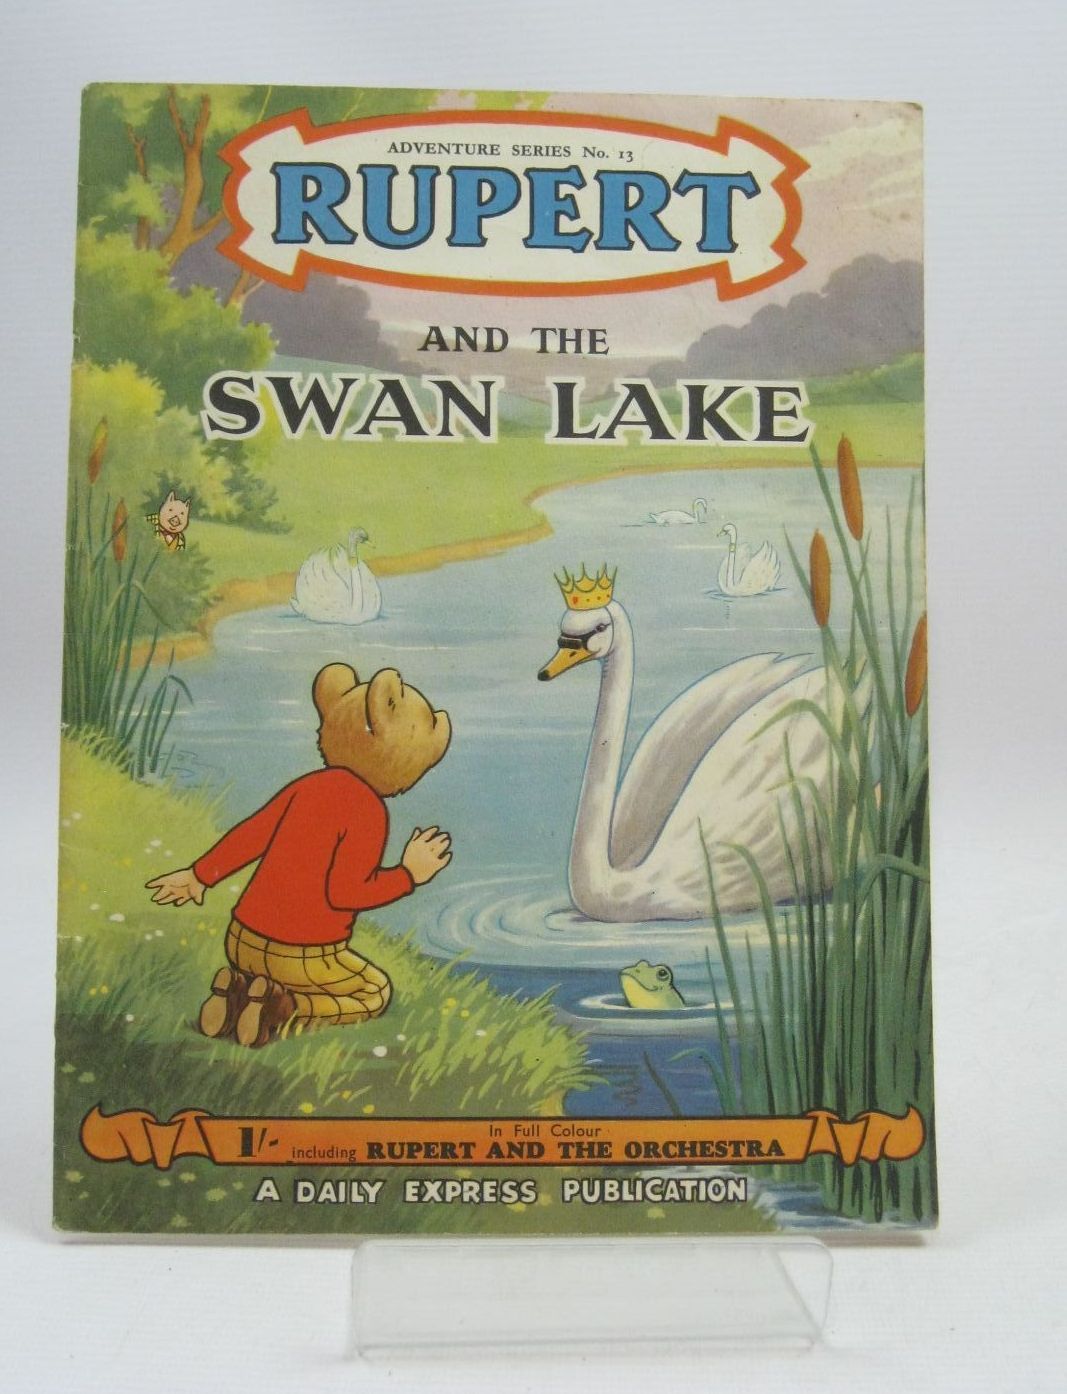 Photo of RUPERT ADVENTURE SERIES No. 13 - RUPERT AND THE SWAN LAKE written by Bestall, Alfred illustrated by Ash, Enid Cubie, Alex published by Daily Express (STOCK CODE: 1405622)  for sale by Stella & Rose's Books